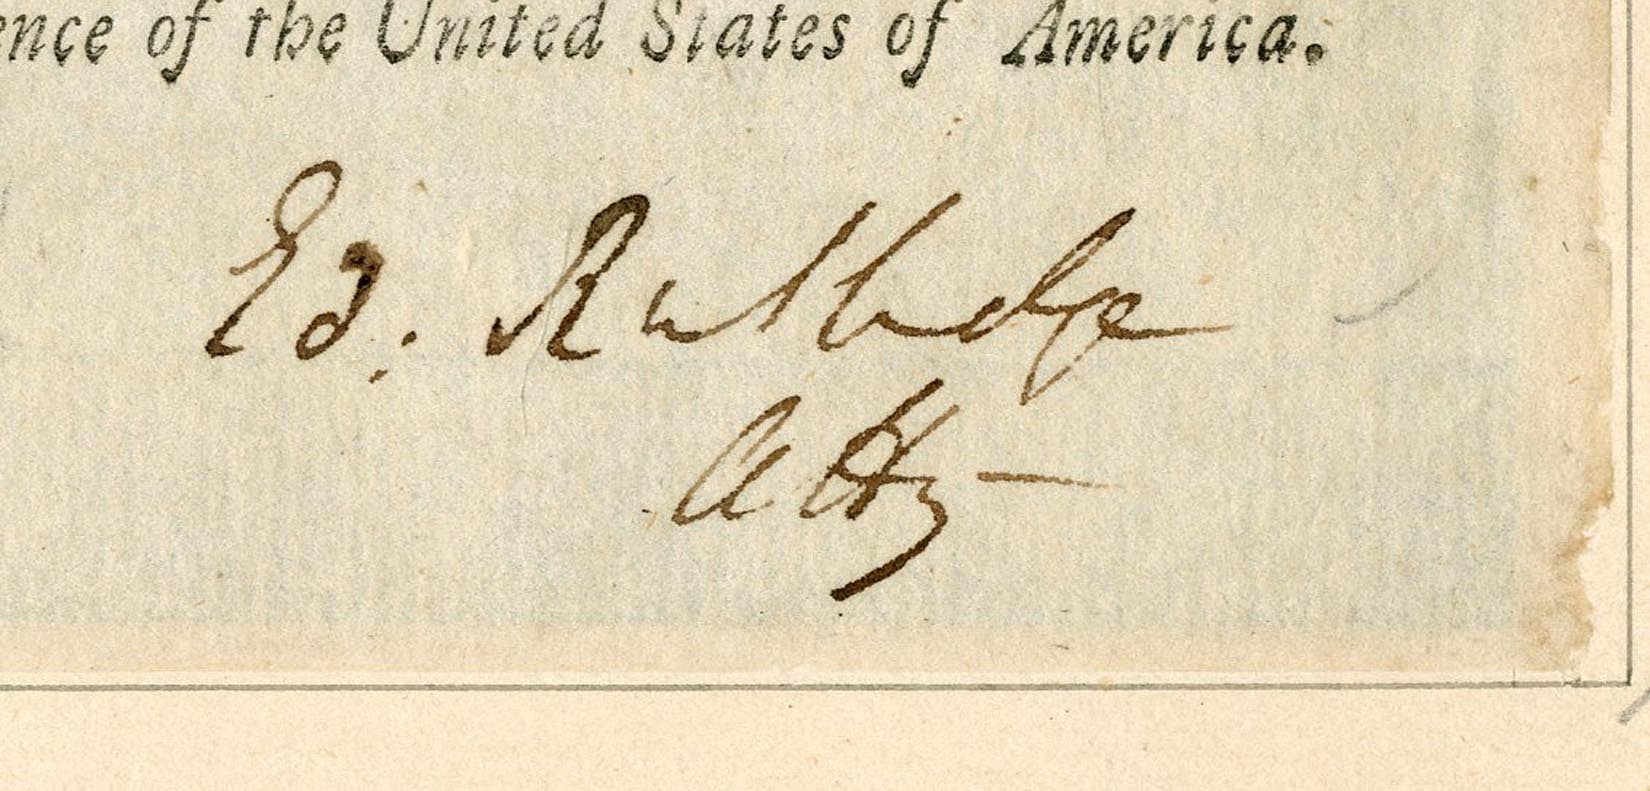 Rock And Pop Culture - 1788 Edward Rutledge Double-Signed Document - Youngest Declaration of Independence Signer